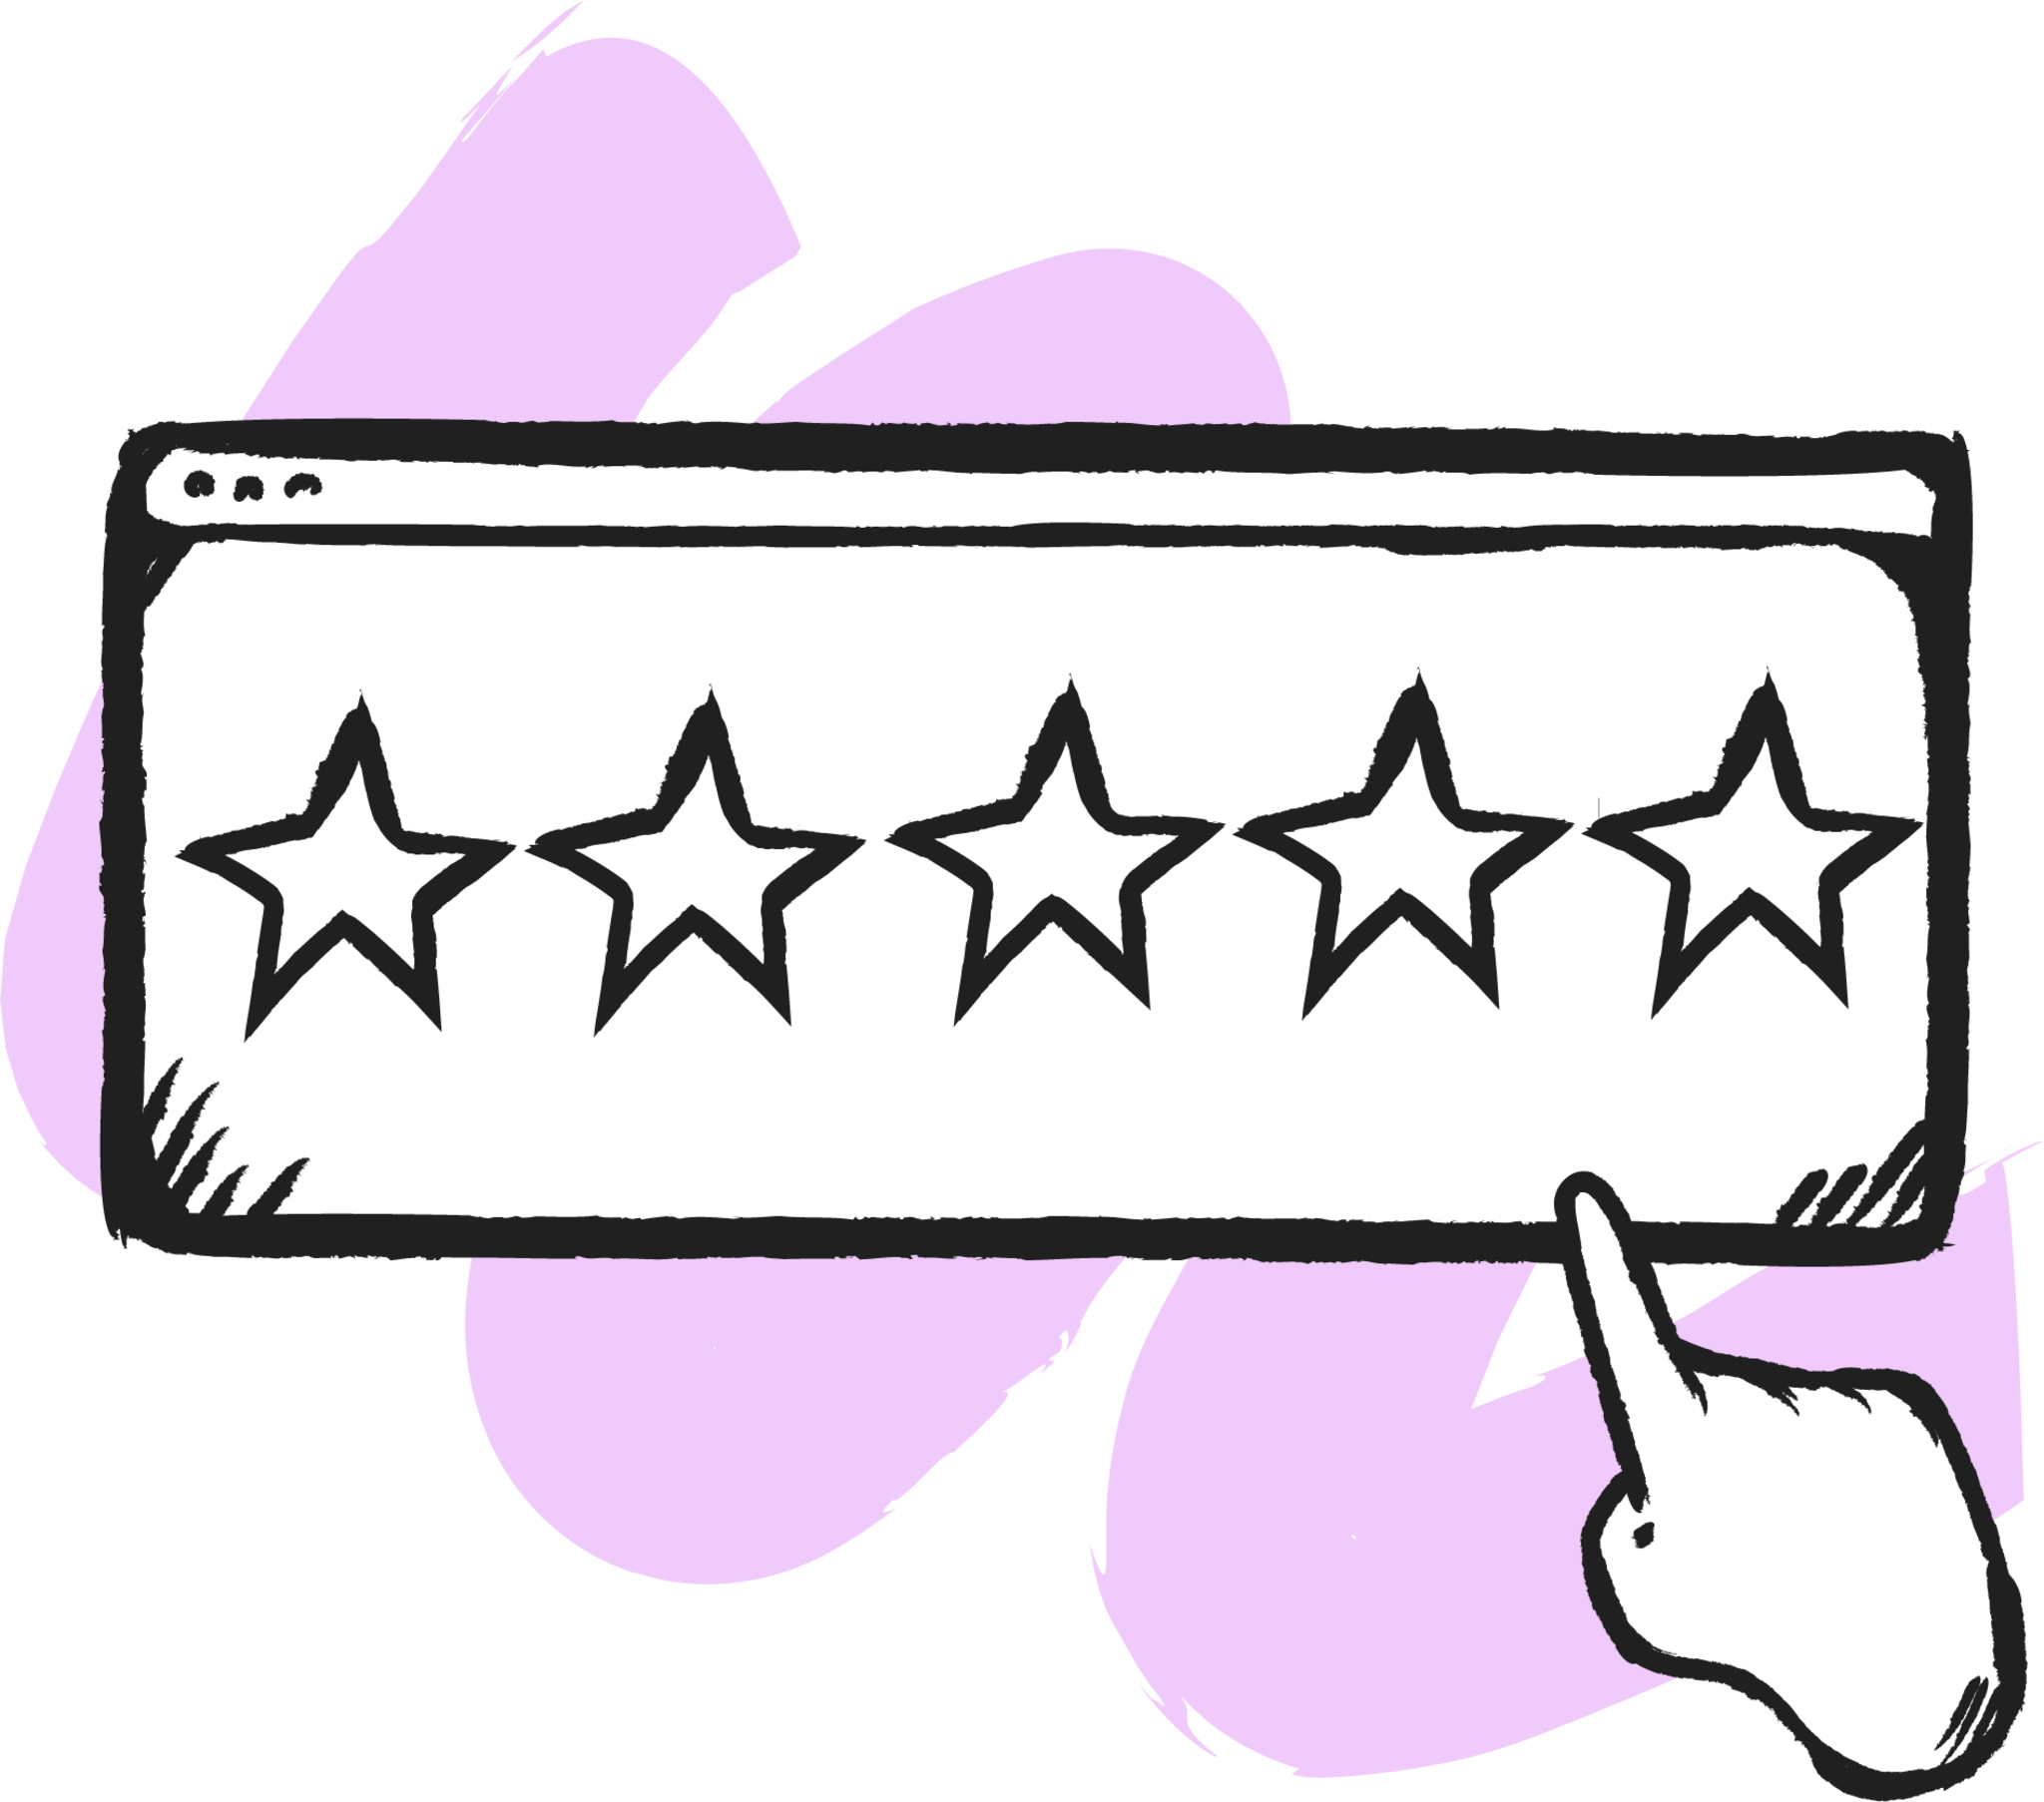 ratings rating online review reviews stars star illustration